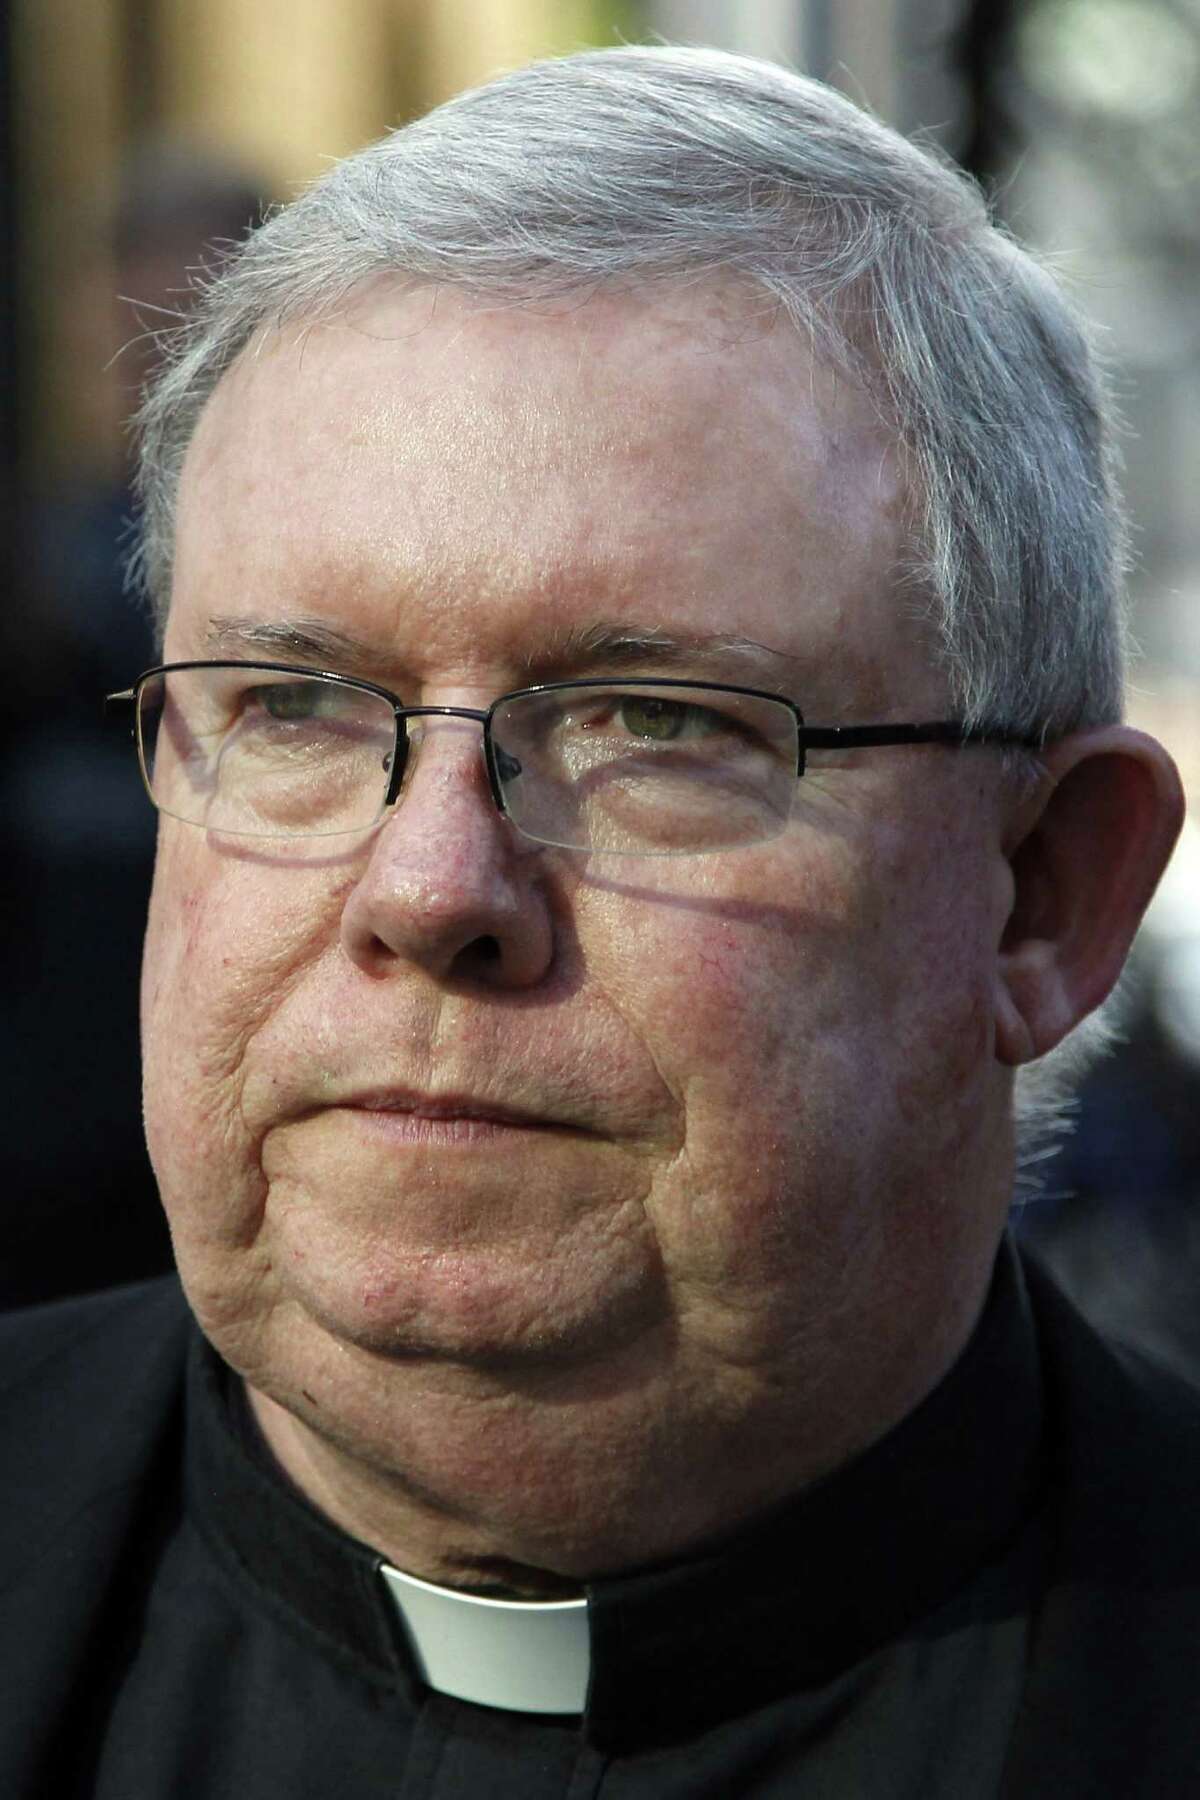 Monsignor William Lynn has been jailed the past 18 months since his conviction.